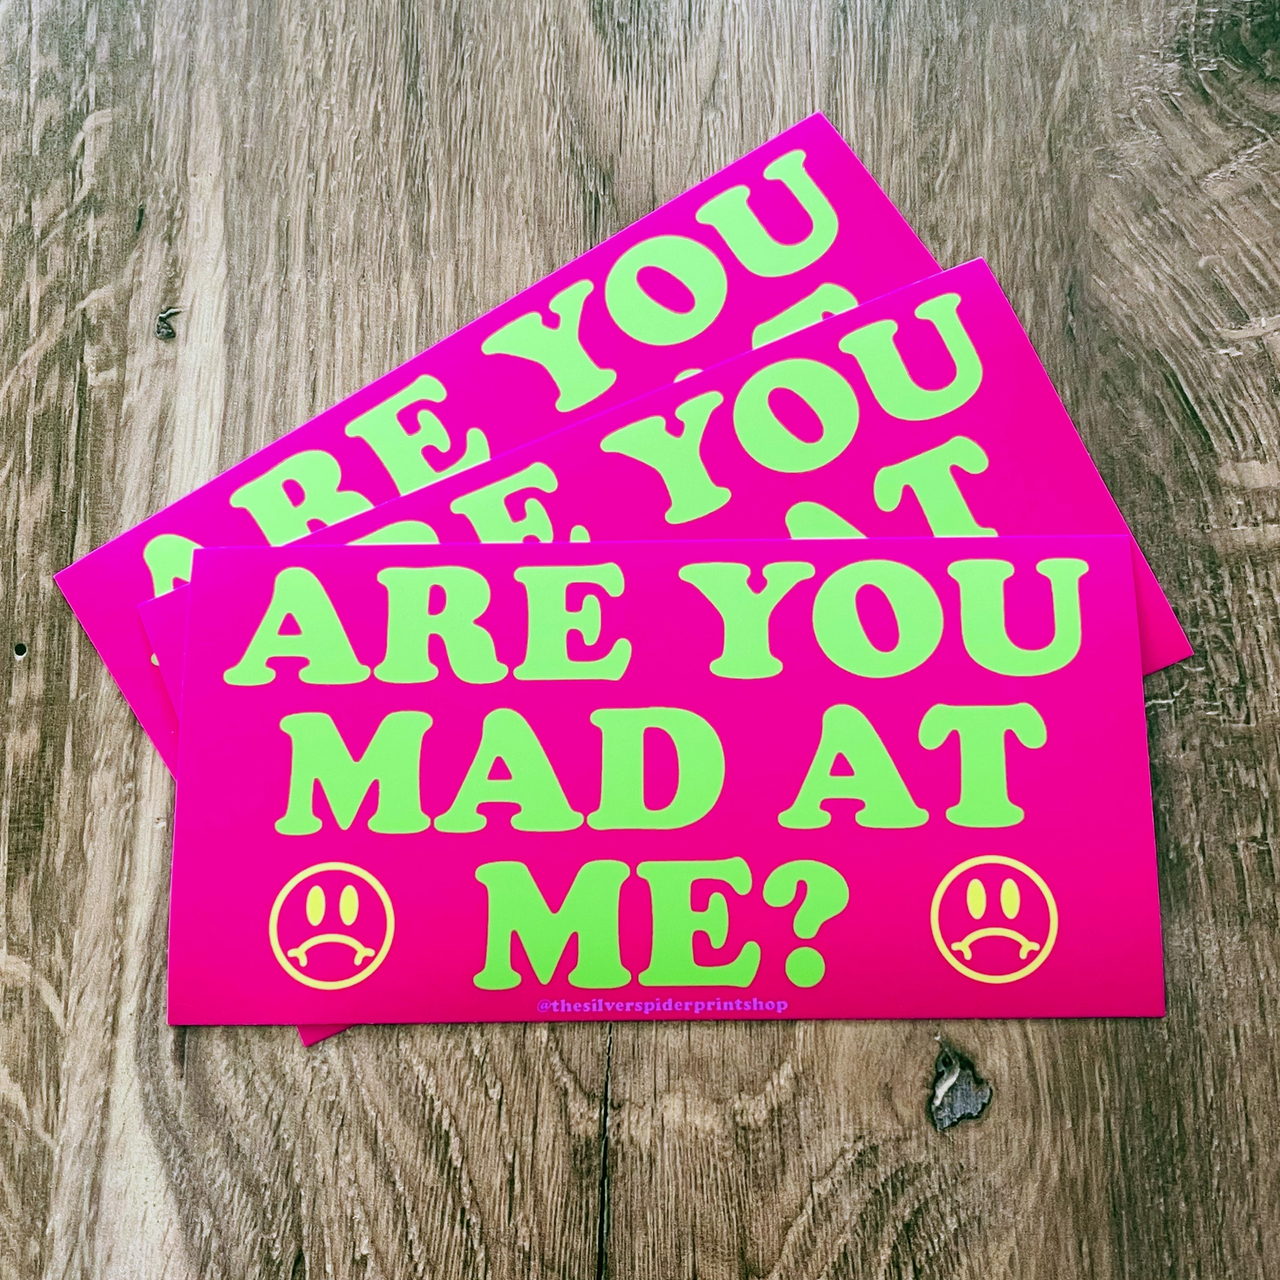 THE SILVER SPIDER ARE YOU MAD AT ME BUMPER STICKER